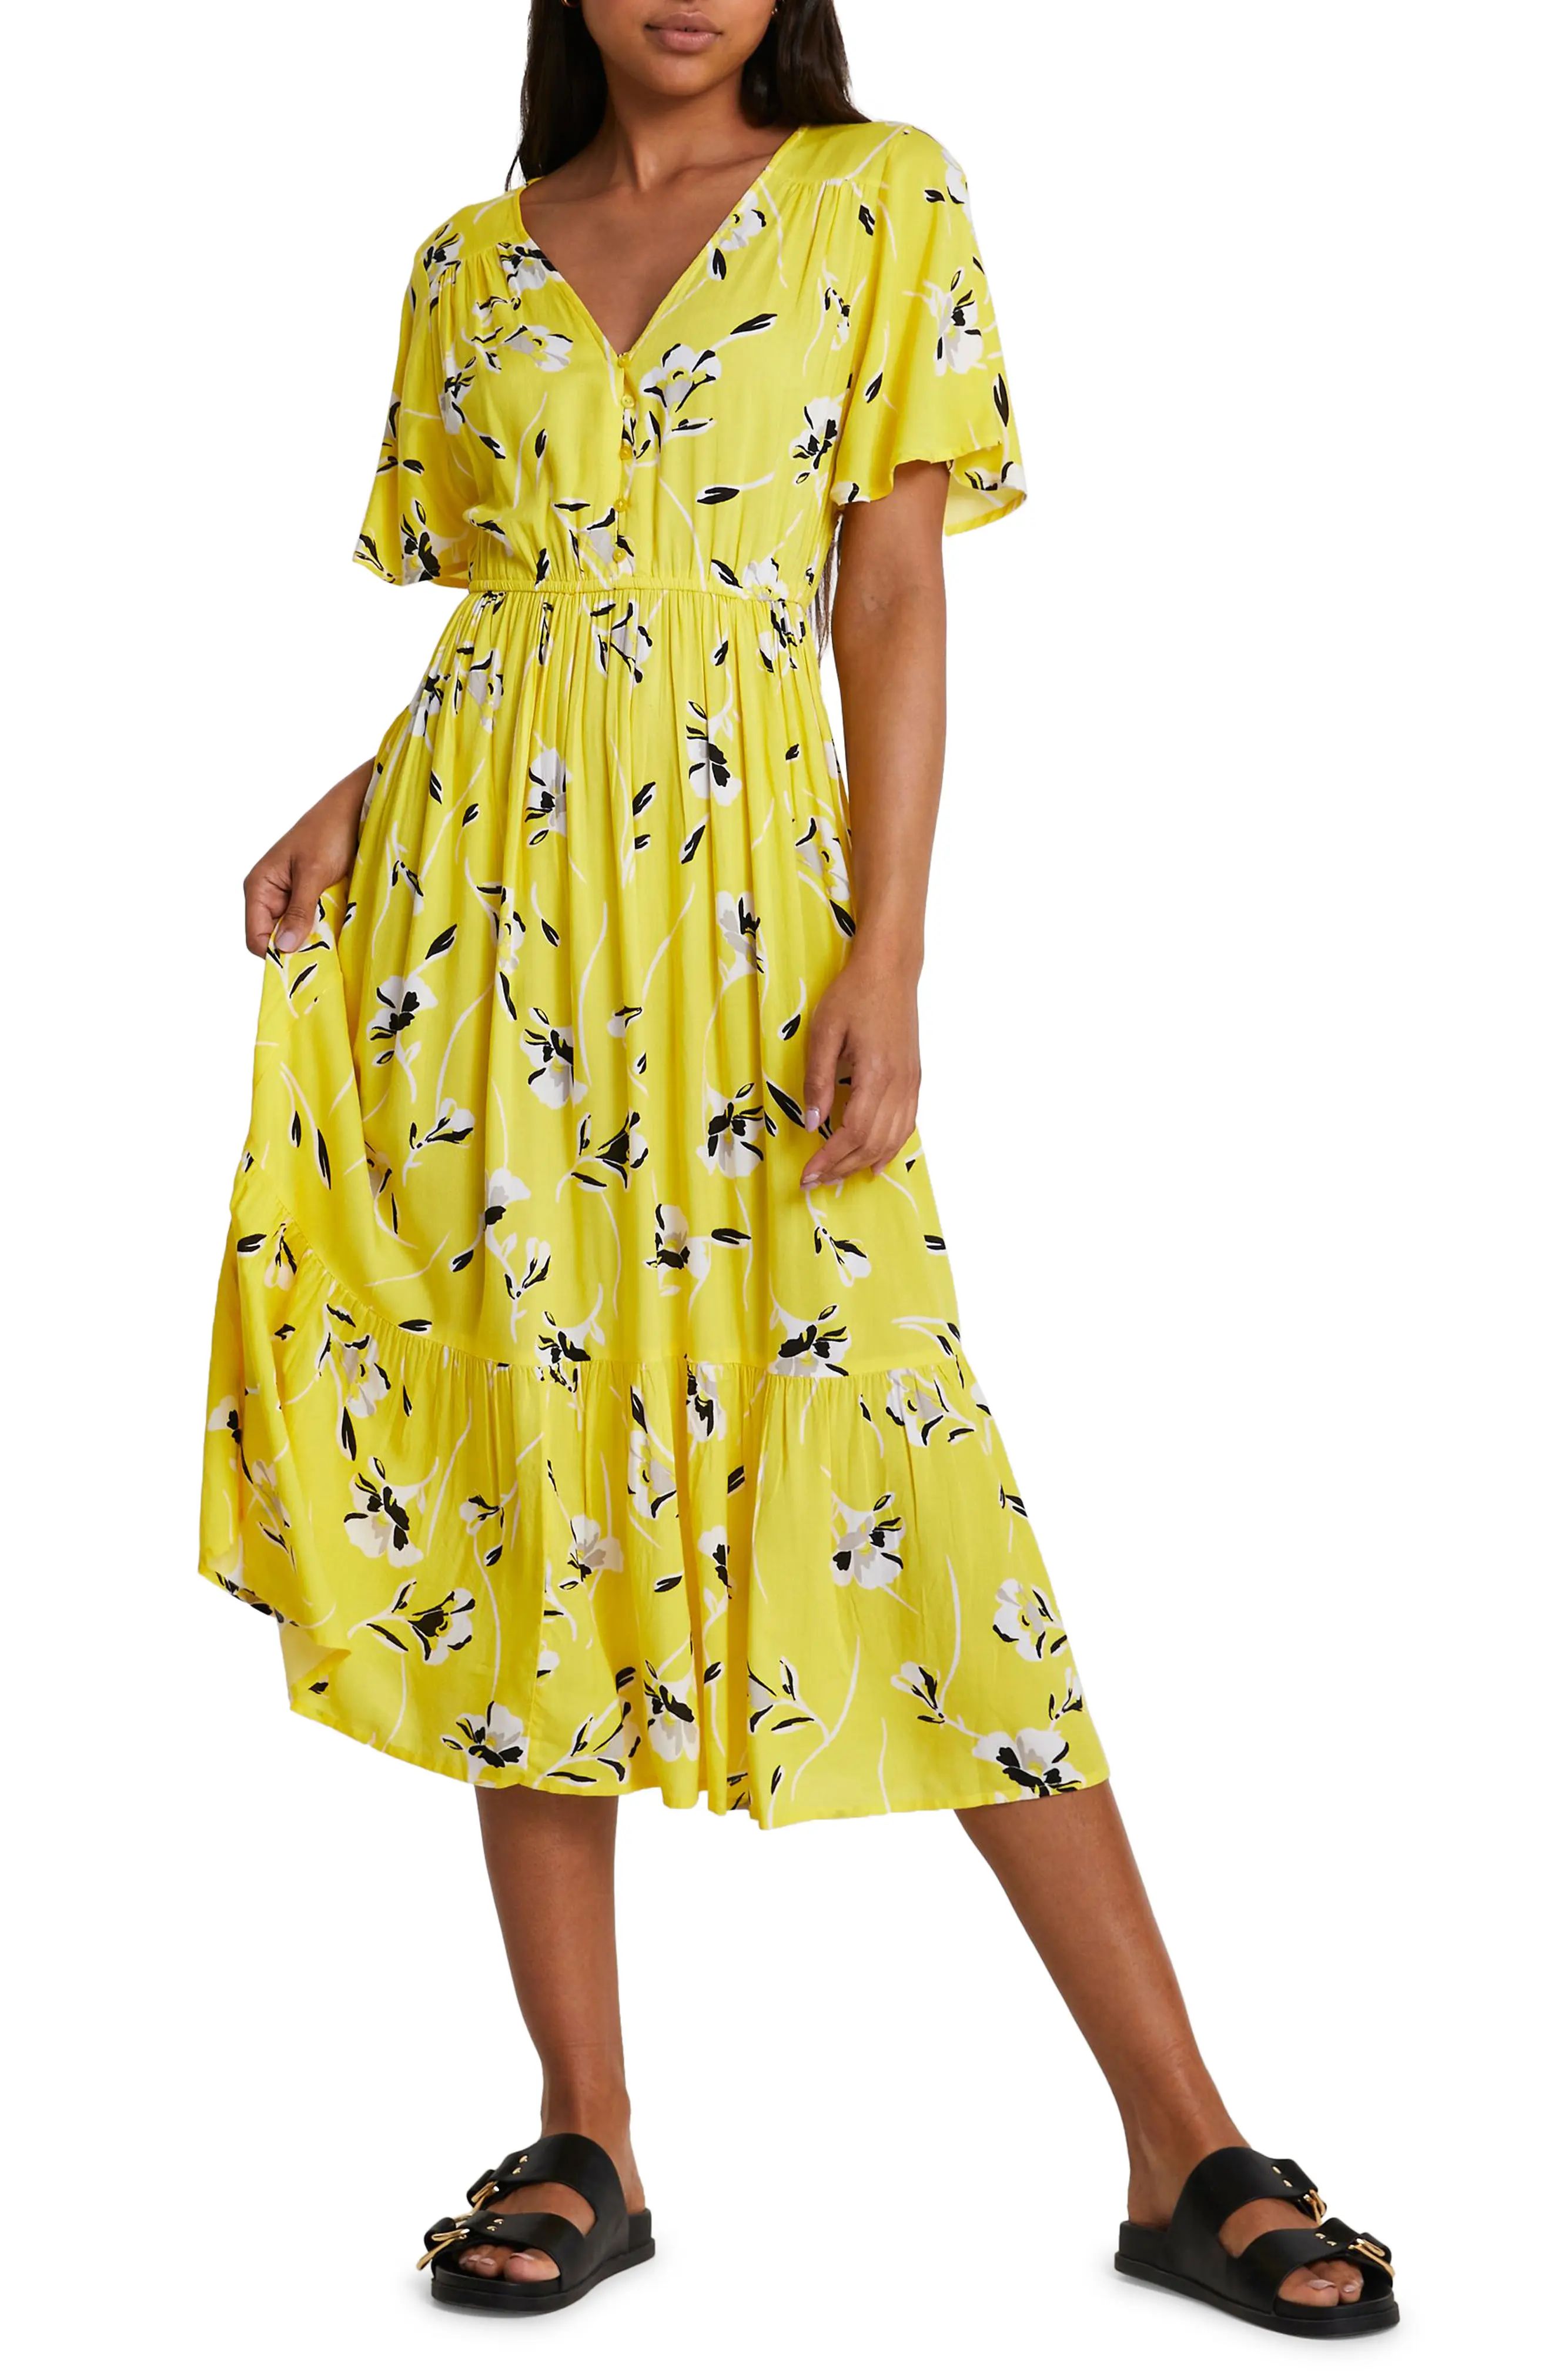 River Island Short Sleeve Floral Dress in Yellow at Nordstrom, Size 6 Us | Nordstrom